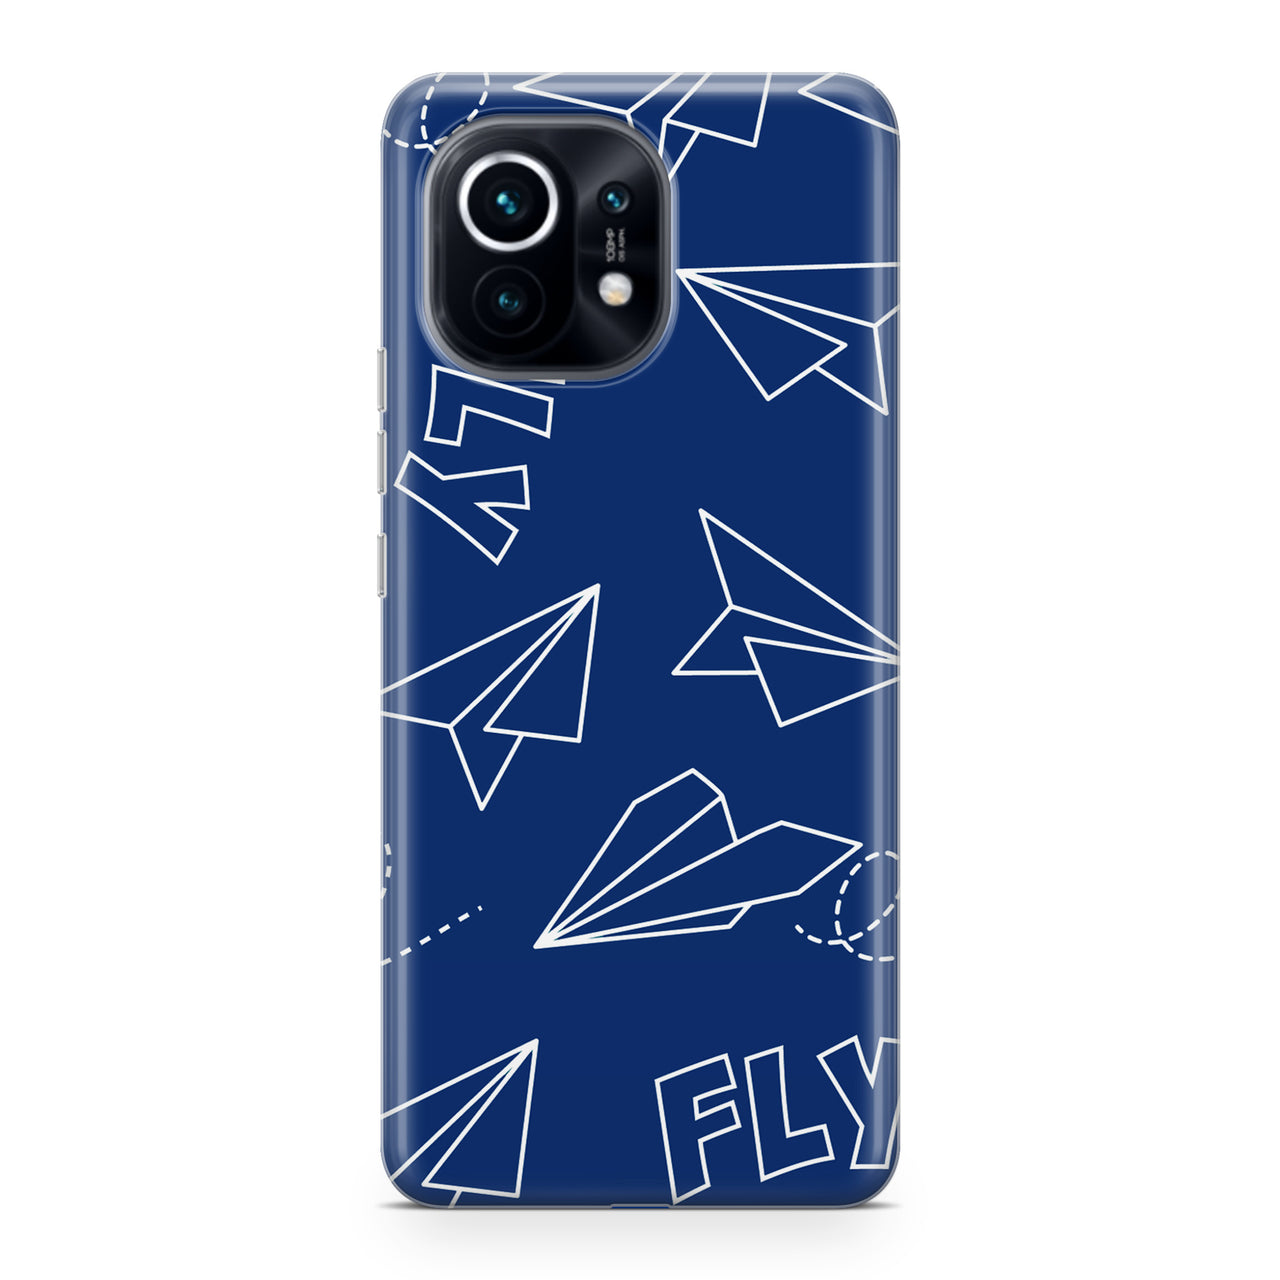 Paper Airplane & Fly-Blue Designed Xiaomi Cases